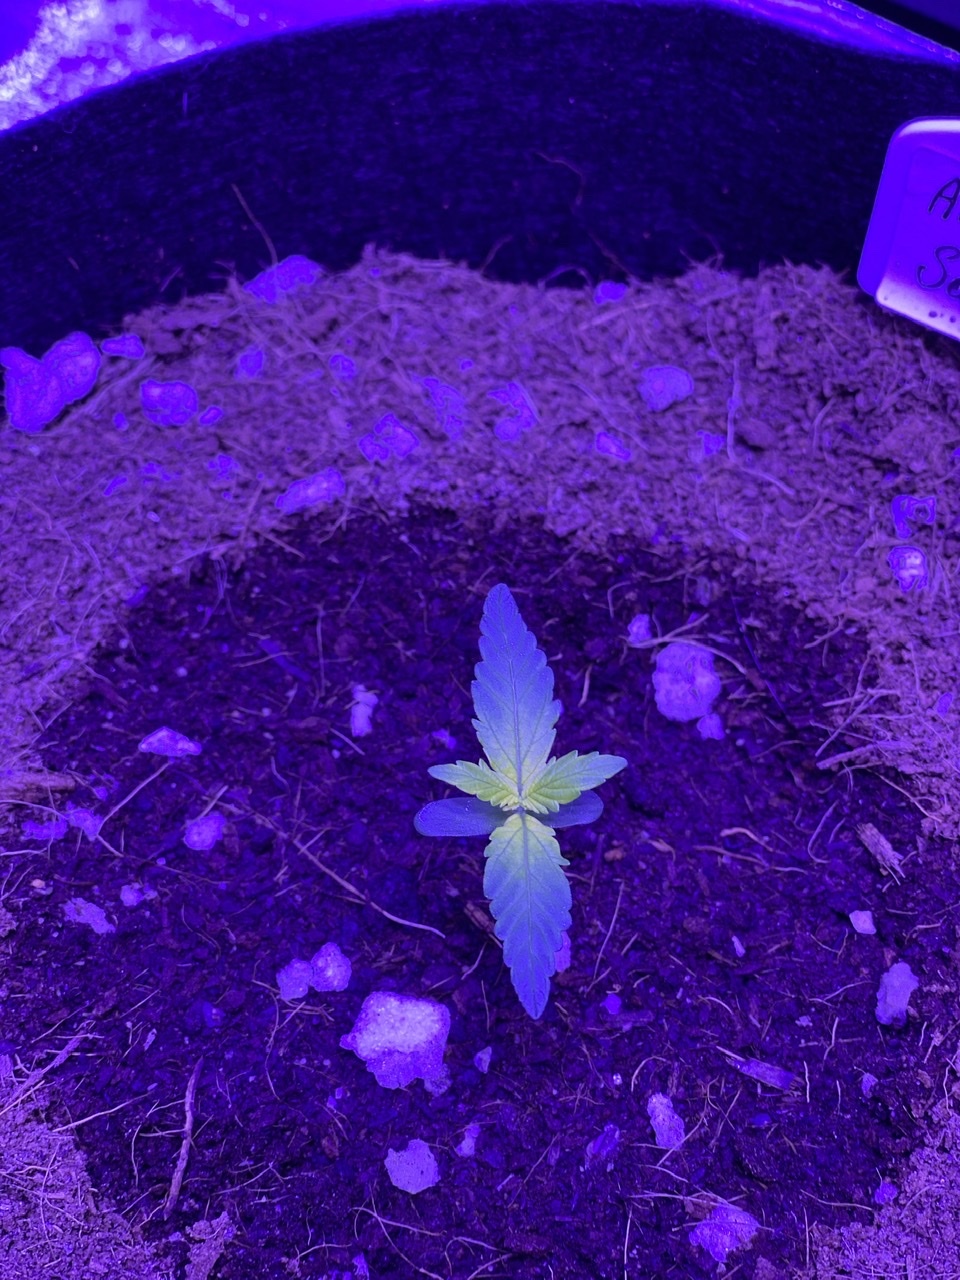 Help need assistance with identifying seedling problem new grower 5